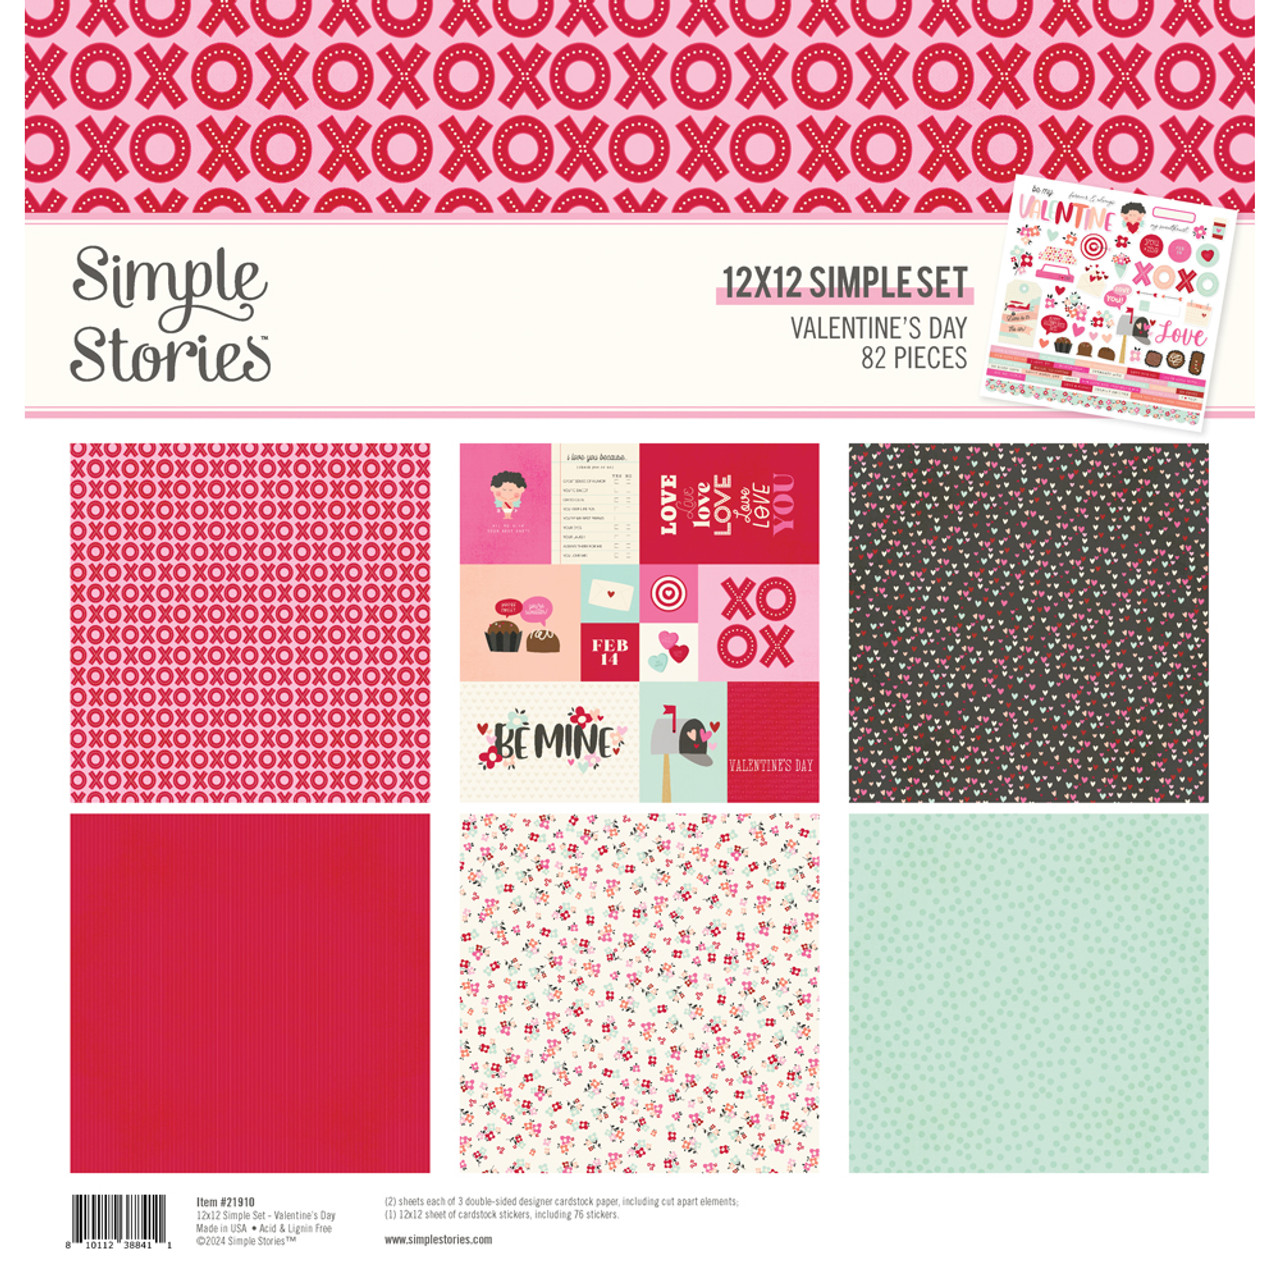 Be My Valentine - With Love - 12x12 Scrapbook Paper by Reminisce - 5 Sheets